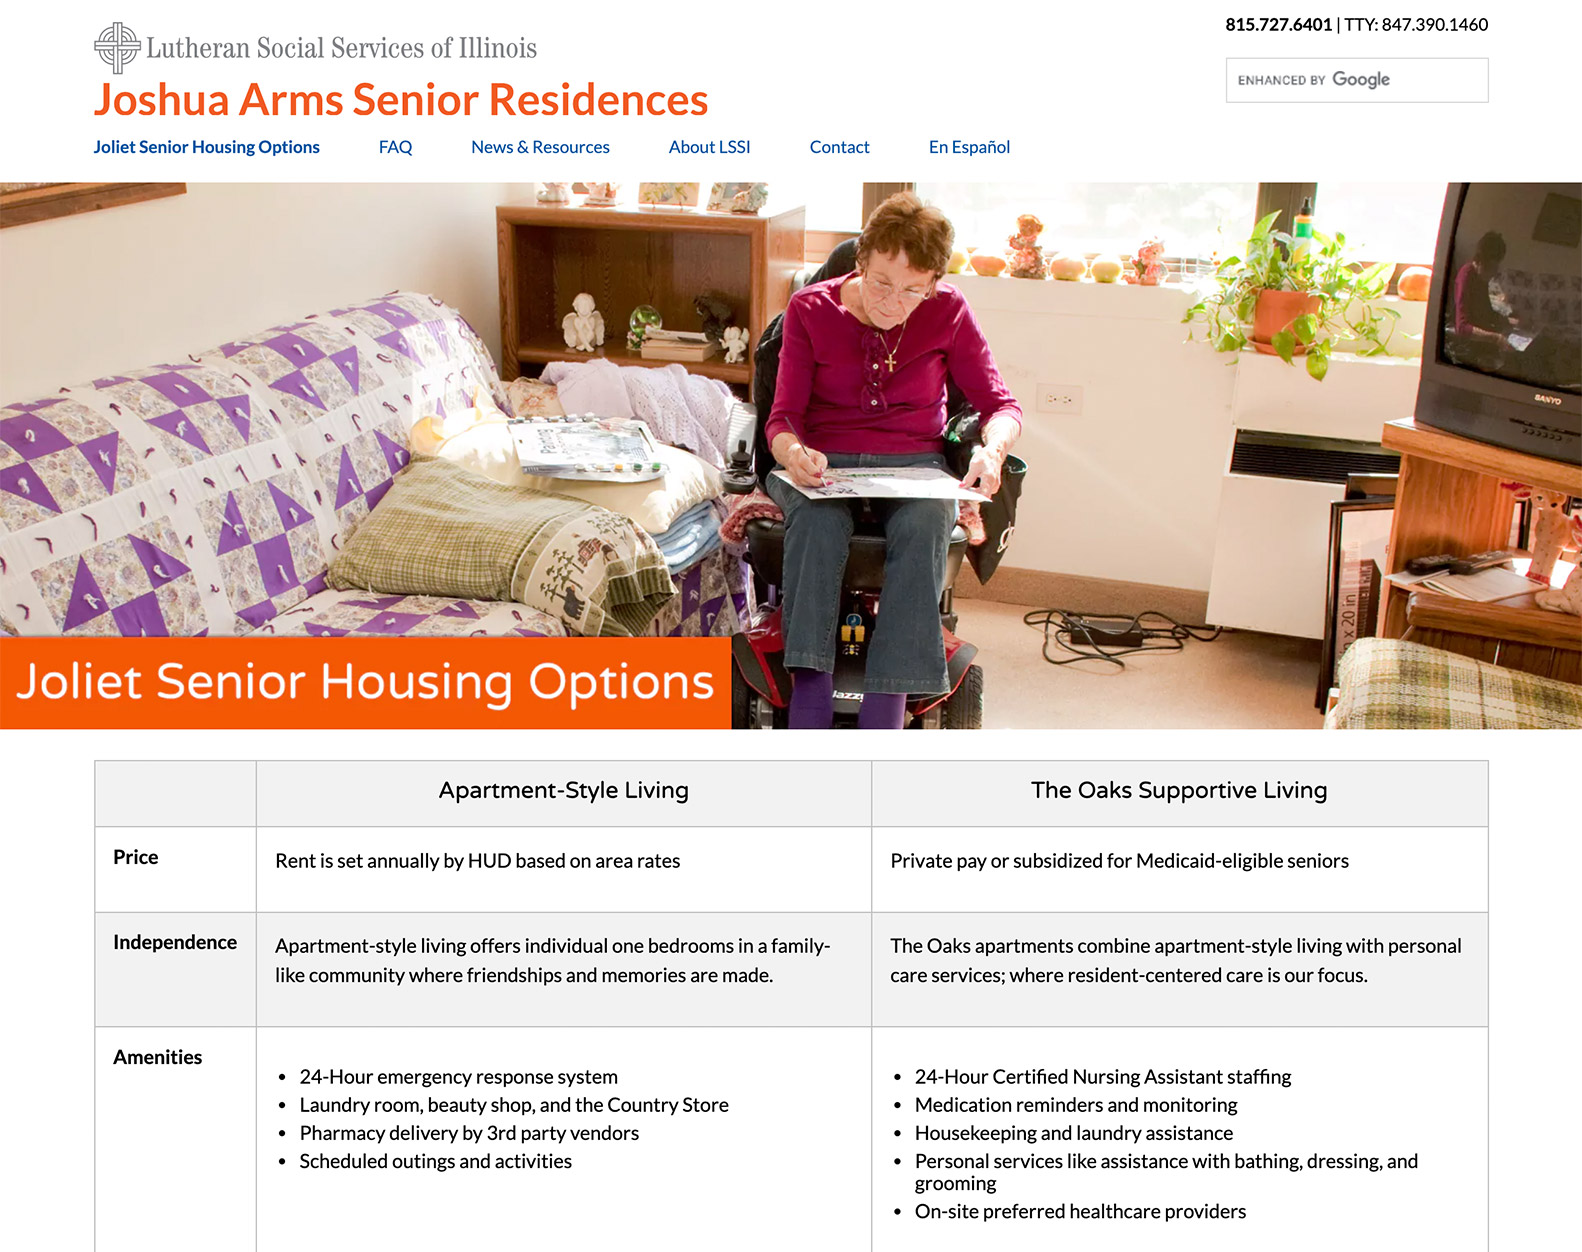 Click here to view a screenshot of Joshua Arms: Senior Housing Options Page - Desktop